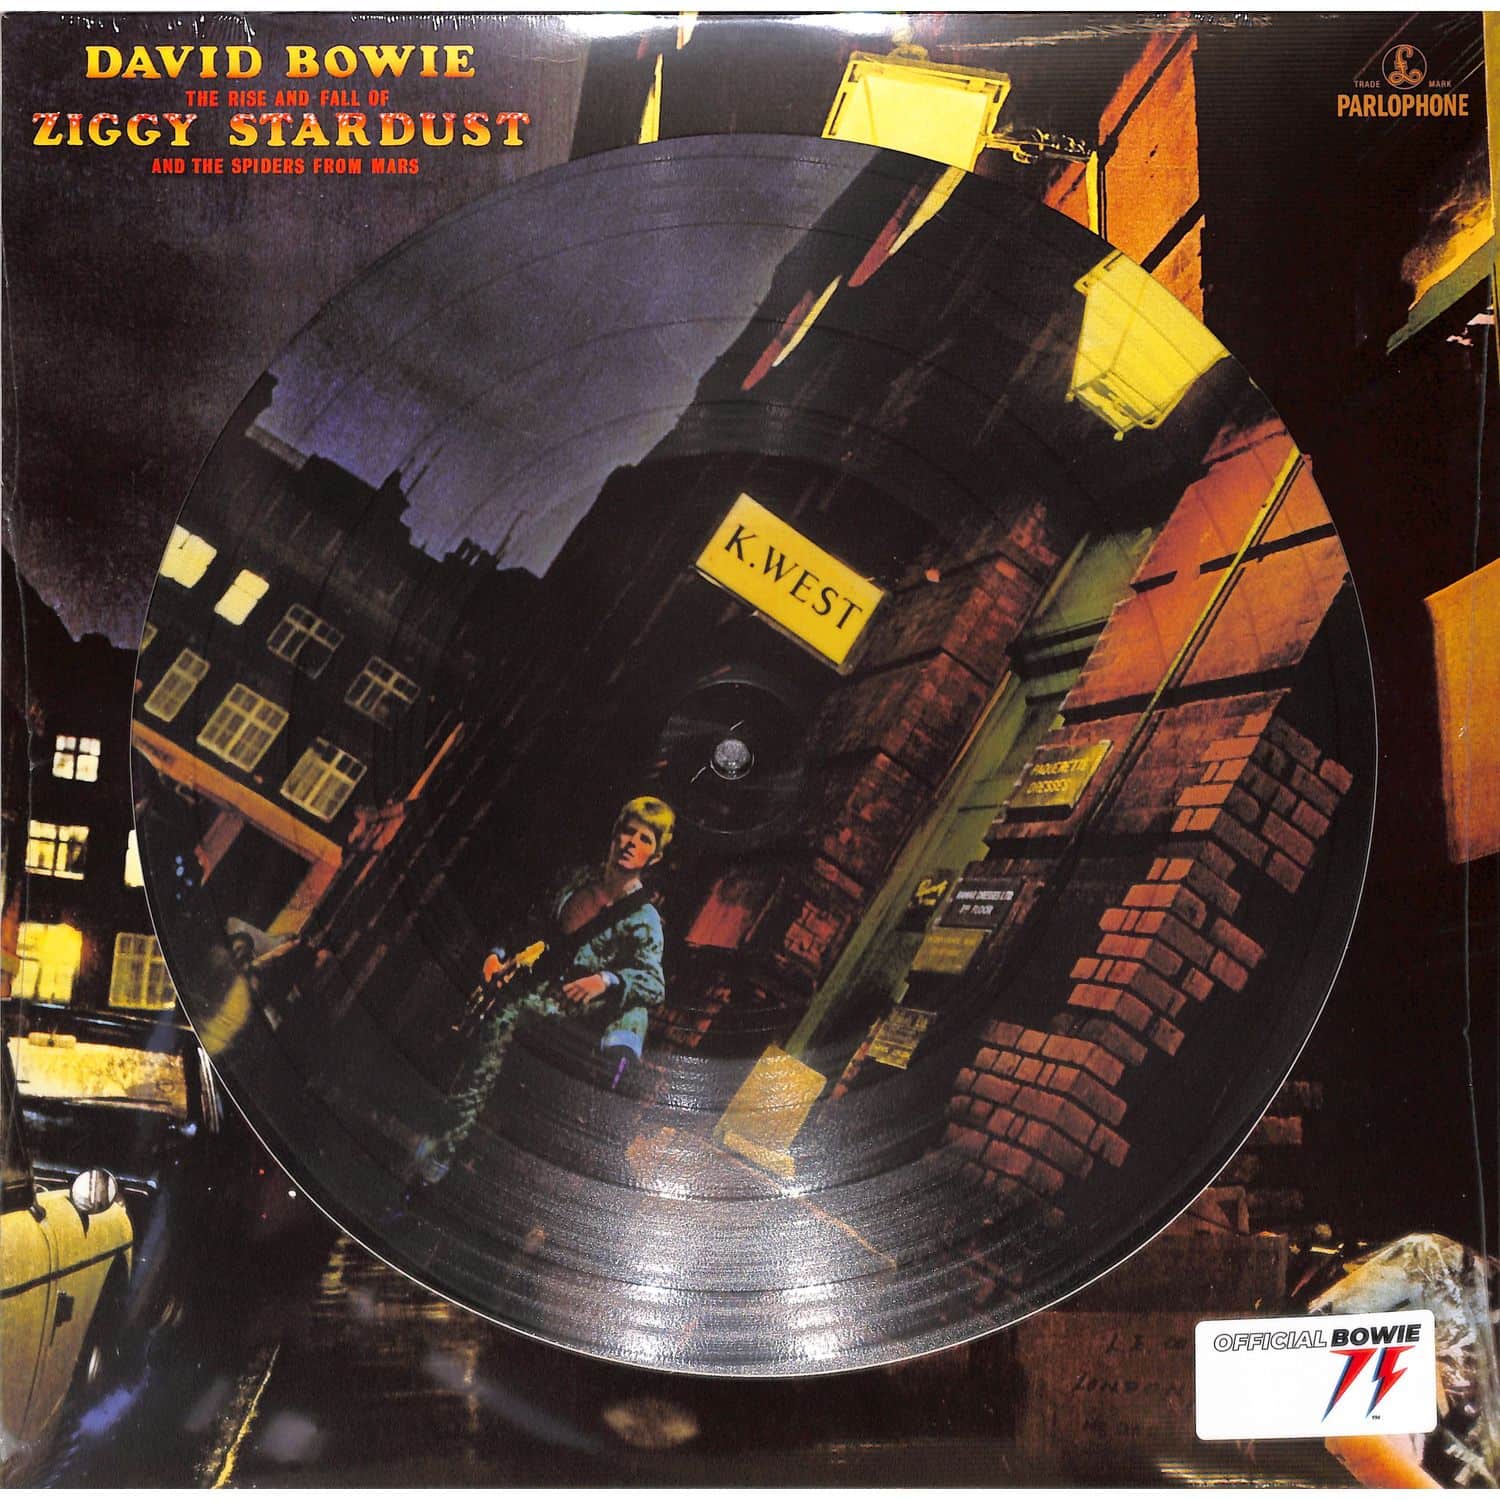 David Bowie - THE RISE AND FALL OF ZIGGY STARDUST AND THE SPIDERS FROM MARS 